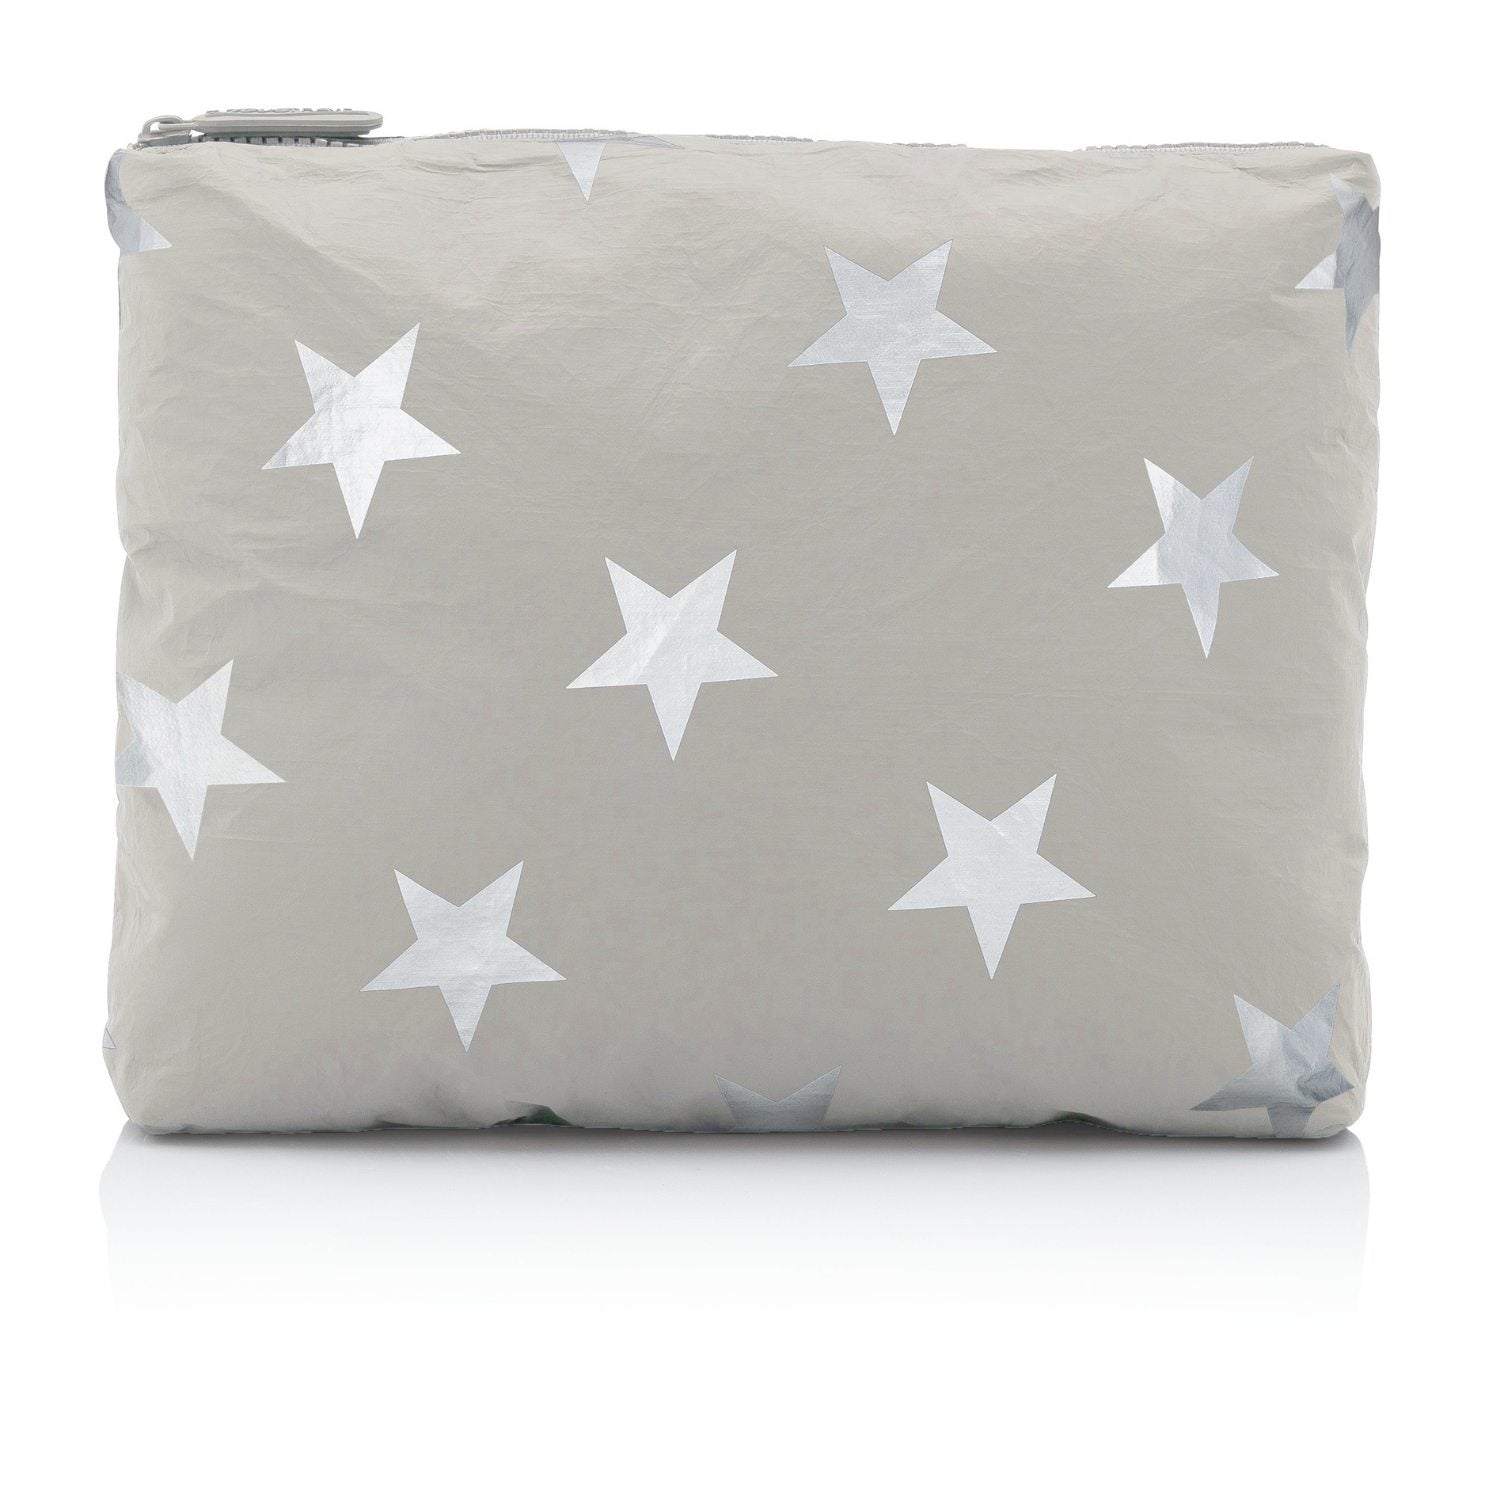 medium zipper pack in earth gray with silver stars